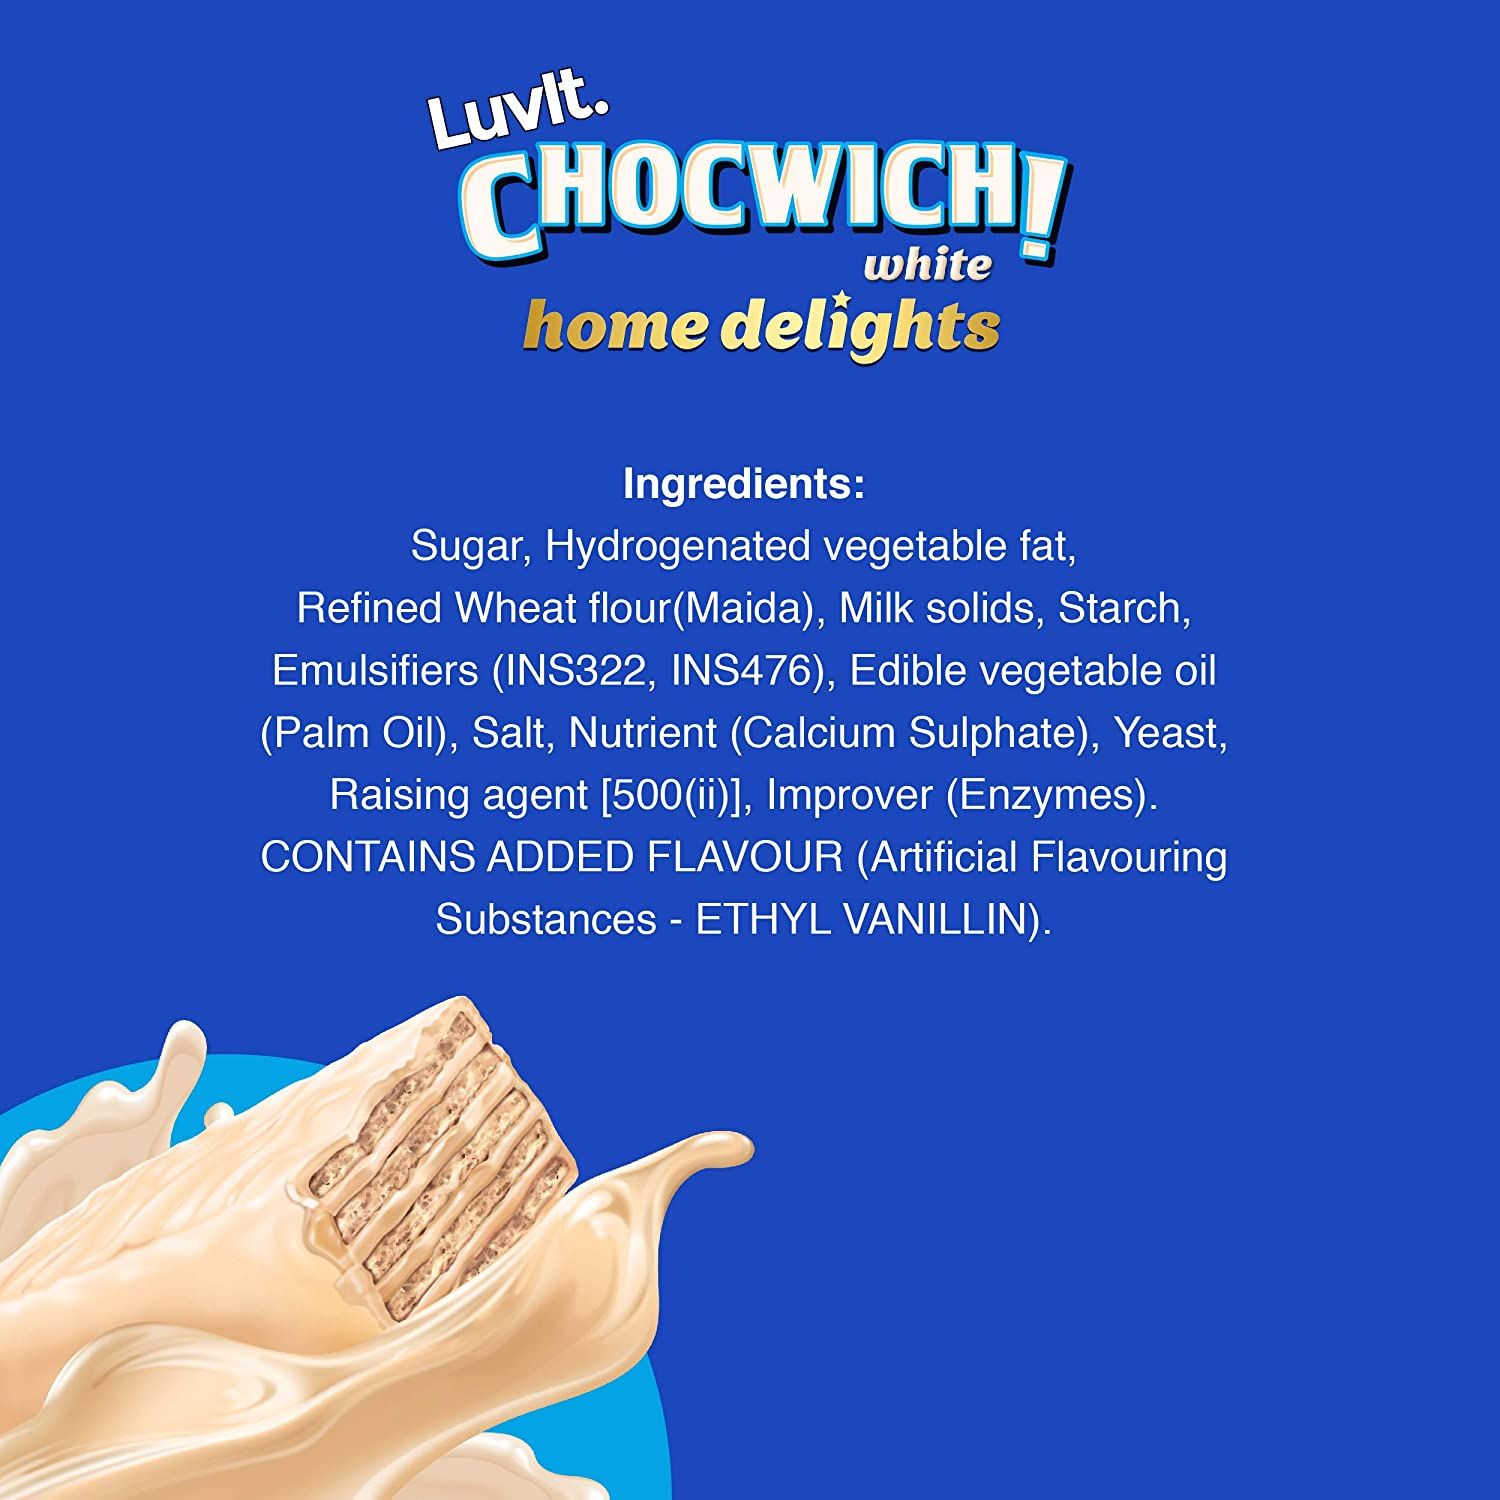 LuvIt Chocwich White Home Delights Wafer Chocolates Image